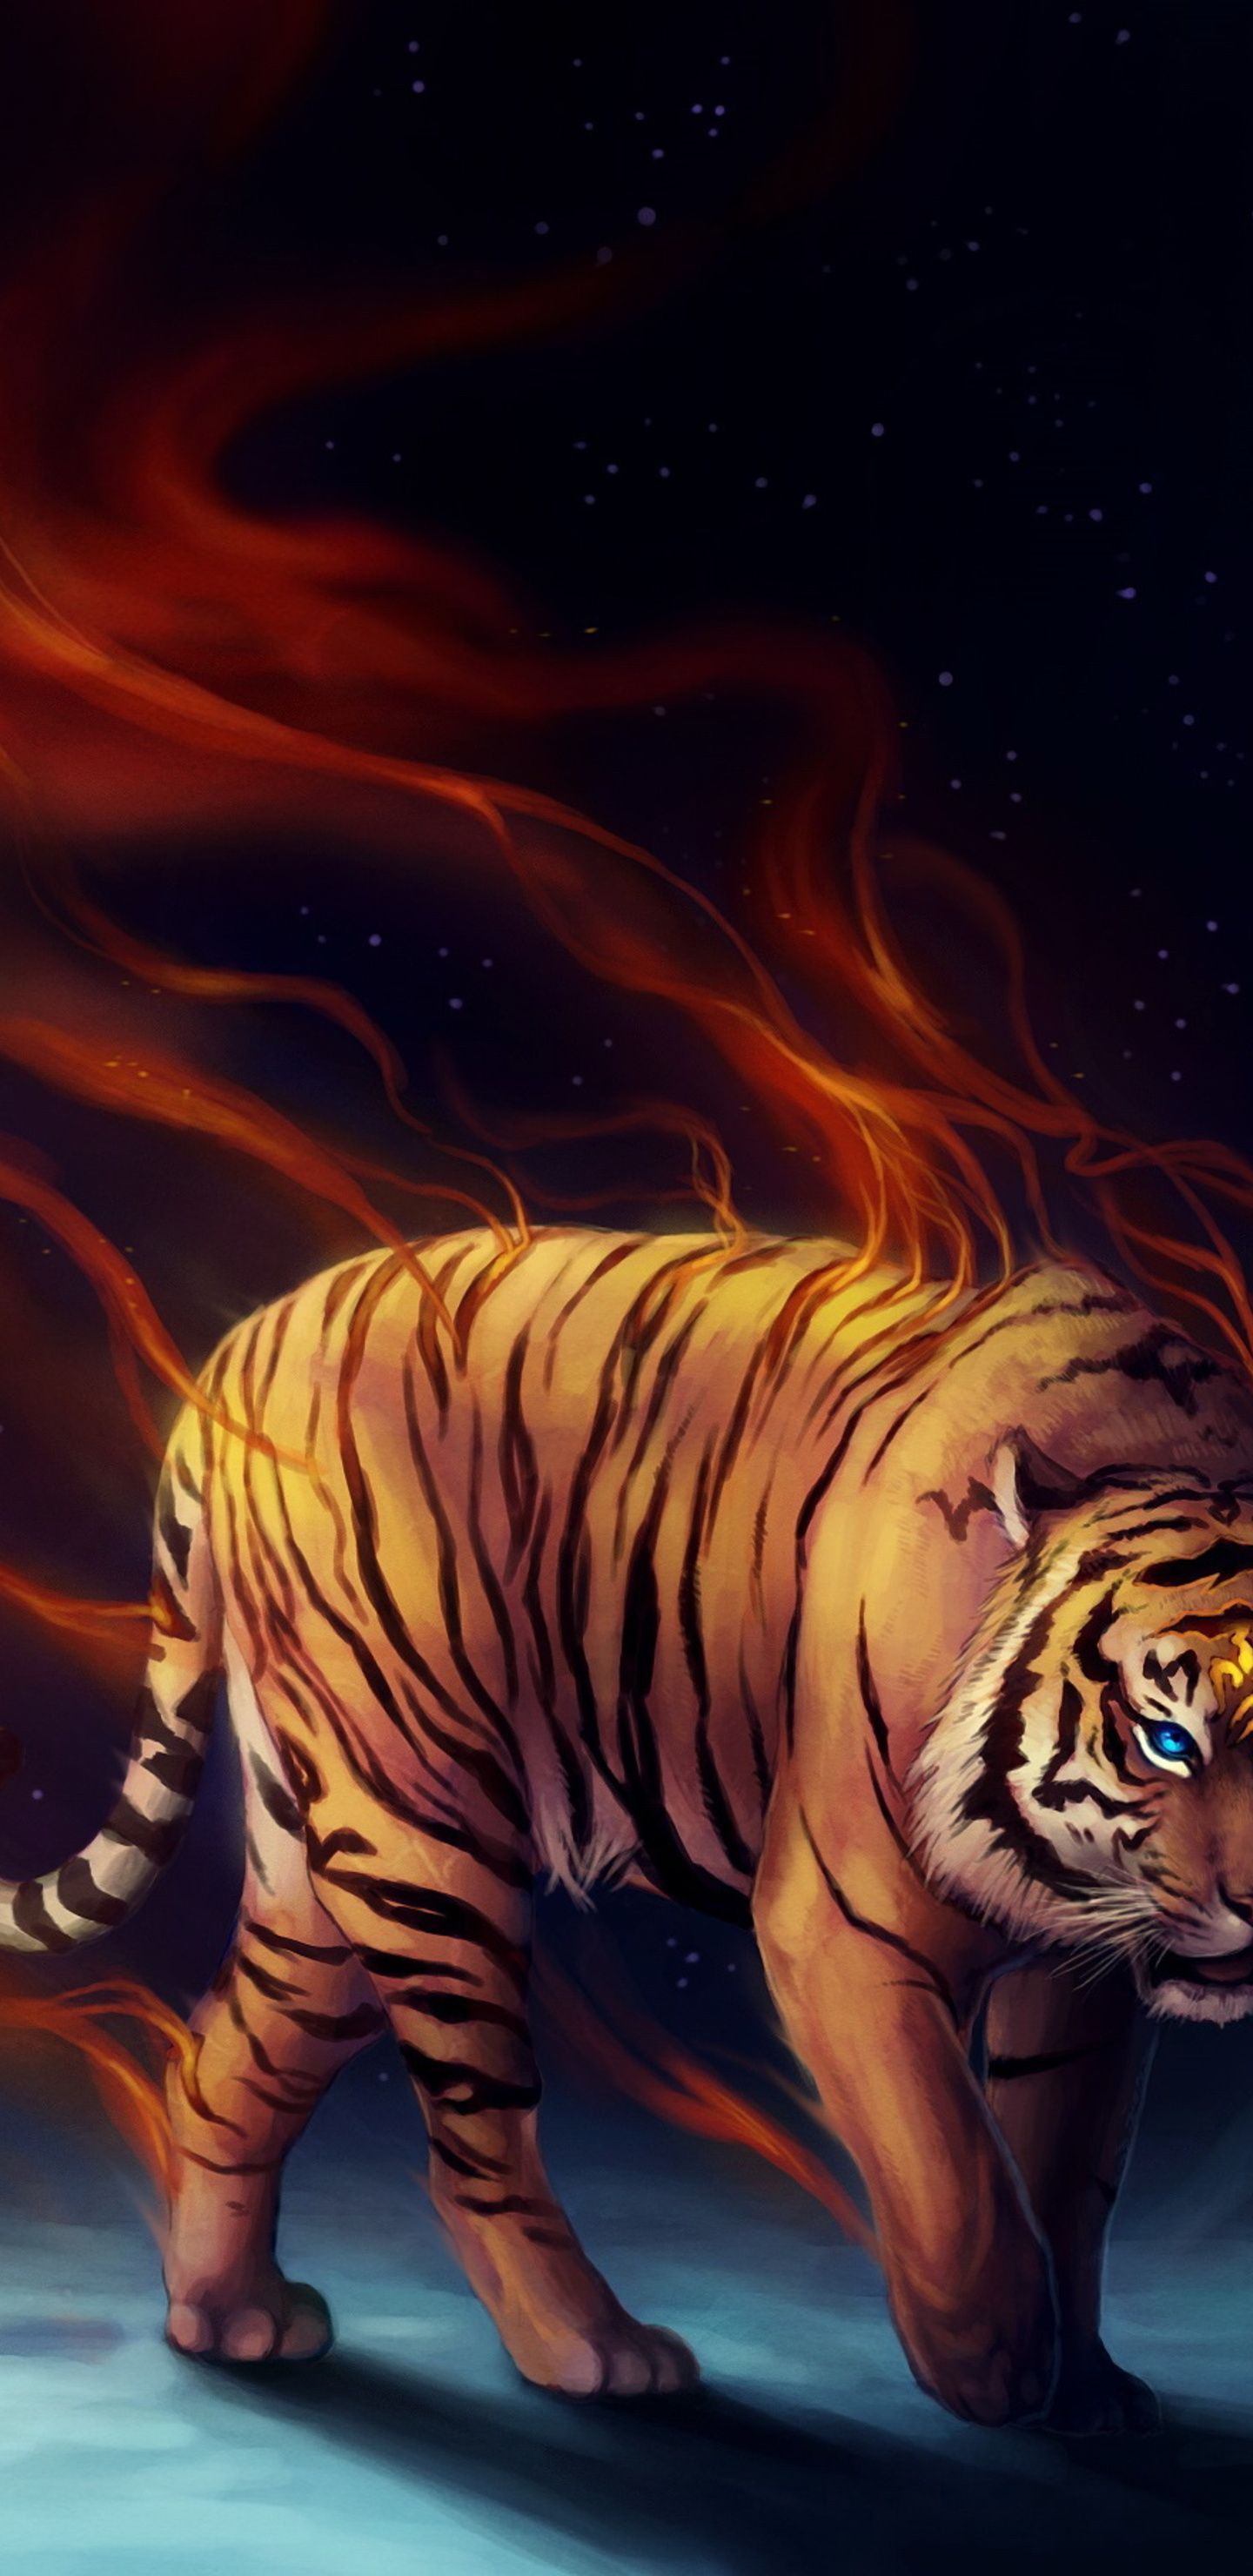 Tiger Fantasy Magical Flame 4k Samsung Galaxy Note S S SQHD HD 4k Wallpaper, Image, Background, Photo and Picture